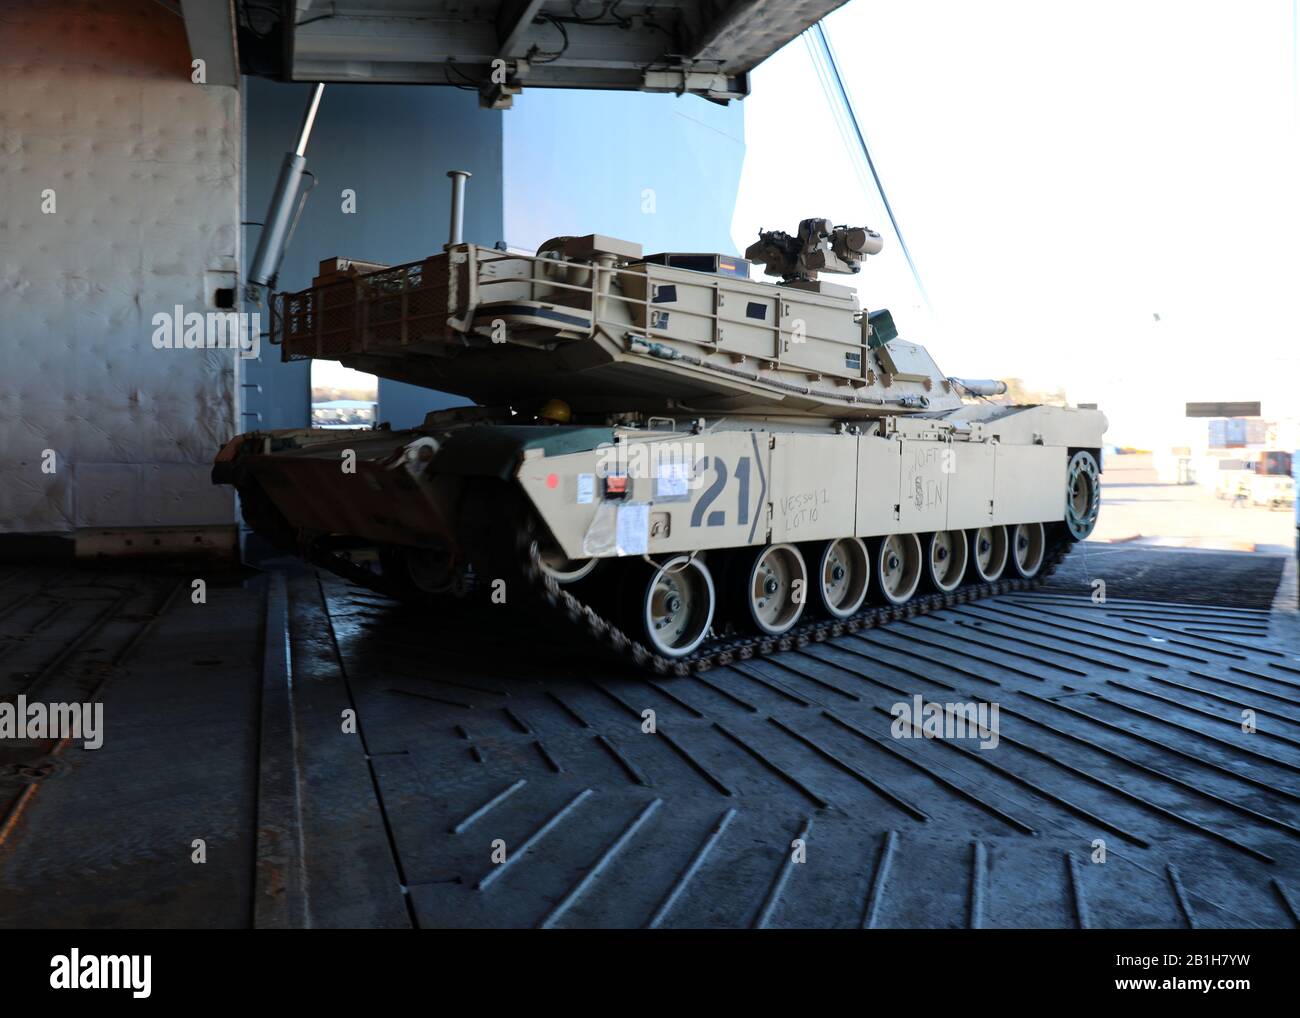 200221-N-OH262-0545 BEAUMONT, TX (February 21, 2020) An M1A1 Abrams tank is loaded aboard Military Sealift Command's large, medium-speed roll on/roll off ship USNS Benavidez (T-AKR 306), pier-side, at the Port of Beaumont, Texas, Feb. 21. The on-load of USNS Benavidez was carried out in support of DEFENDER-Europe 2020. (U.S. Navy photo by Bill Mesta/released) Stock Photo